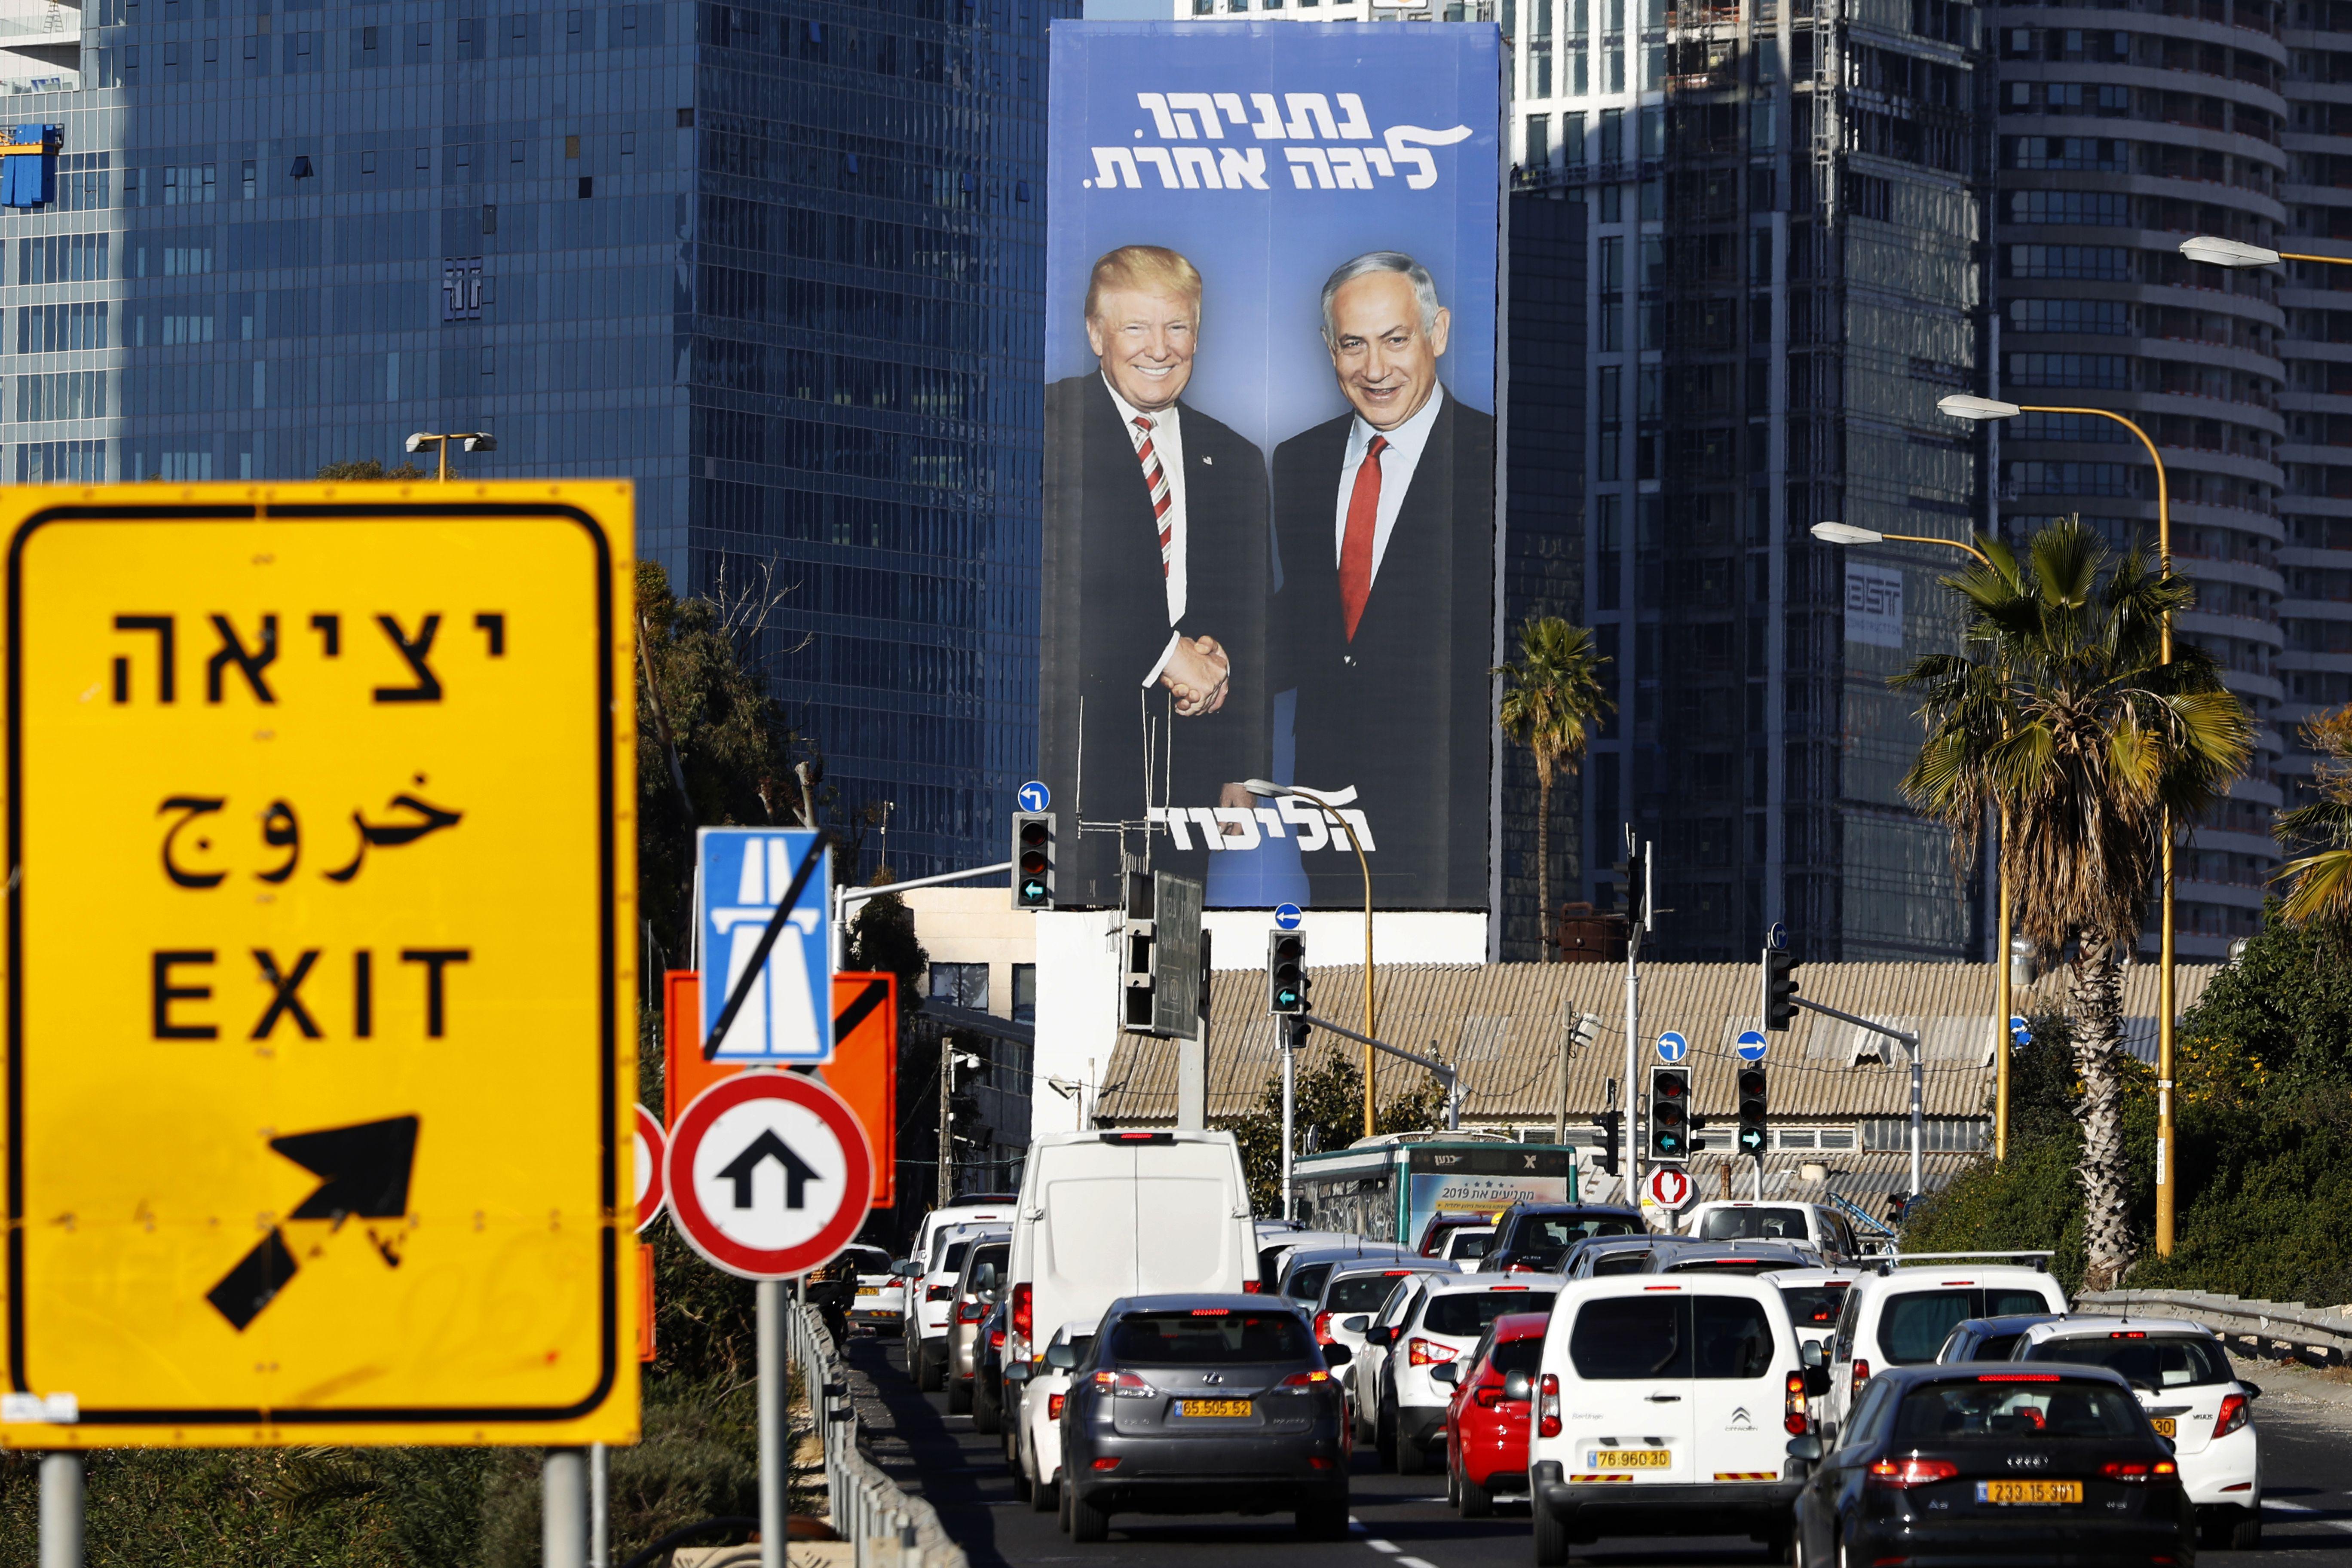 A picture taken on February 3, 2019 in Tel Aviv shows a giant election billboard of Israeli Prime Minister Benjamin Netanyahu and U.S. President Donald Trump shaking hands. 